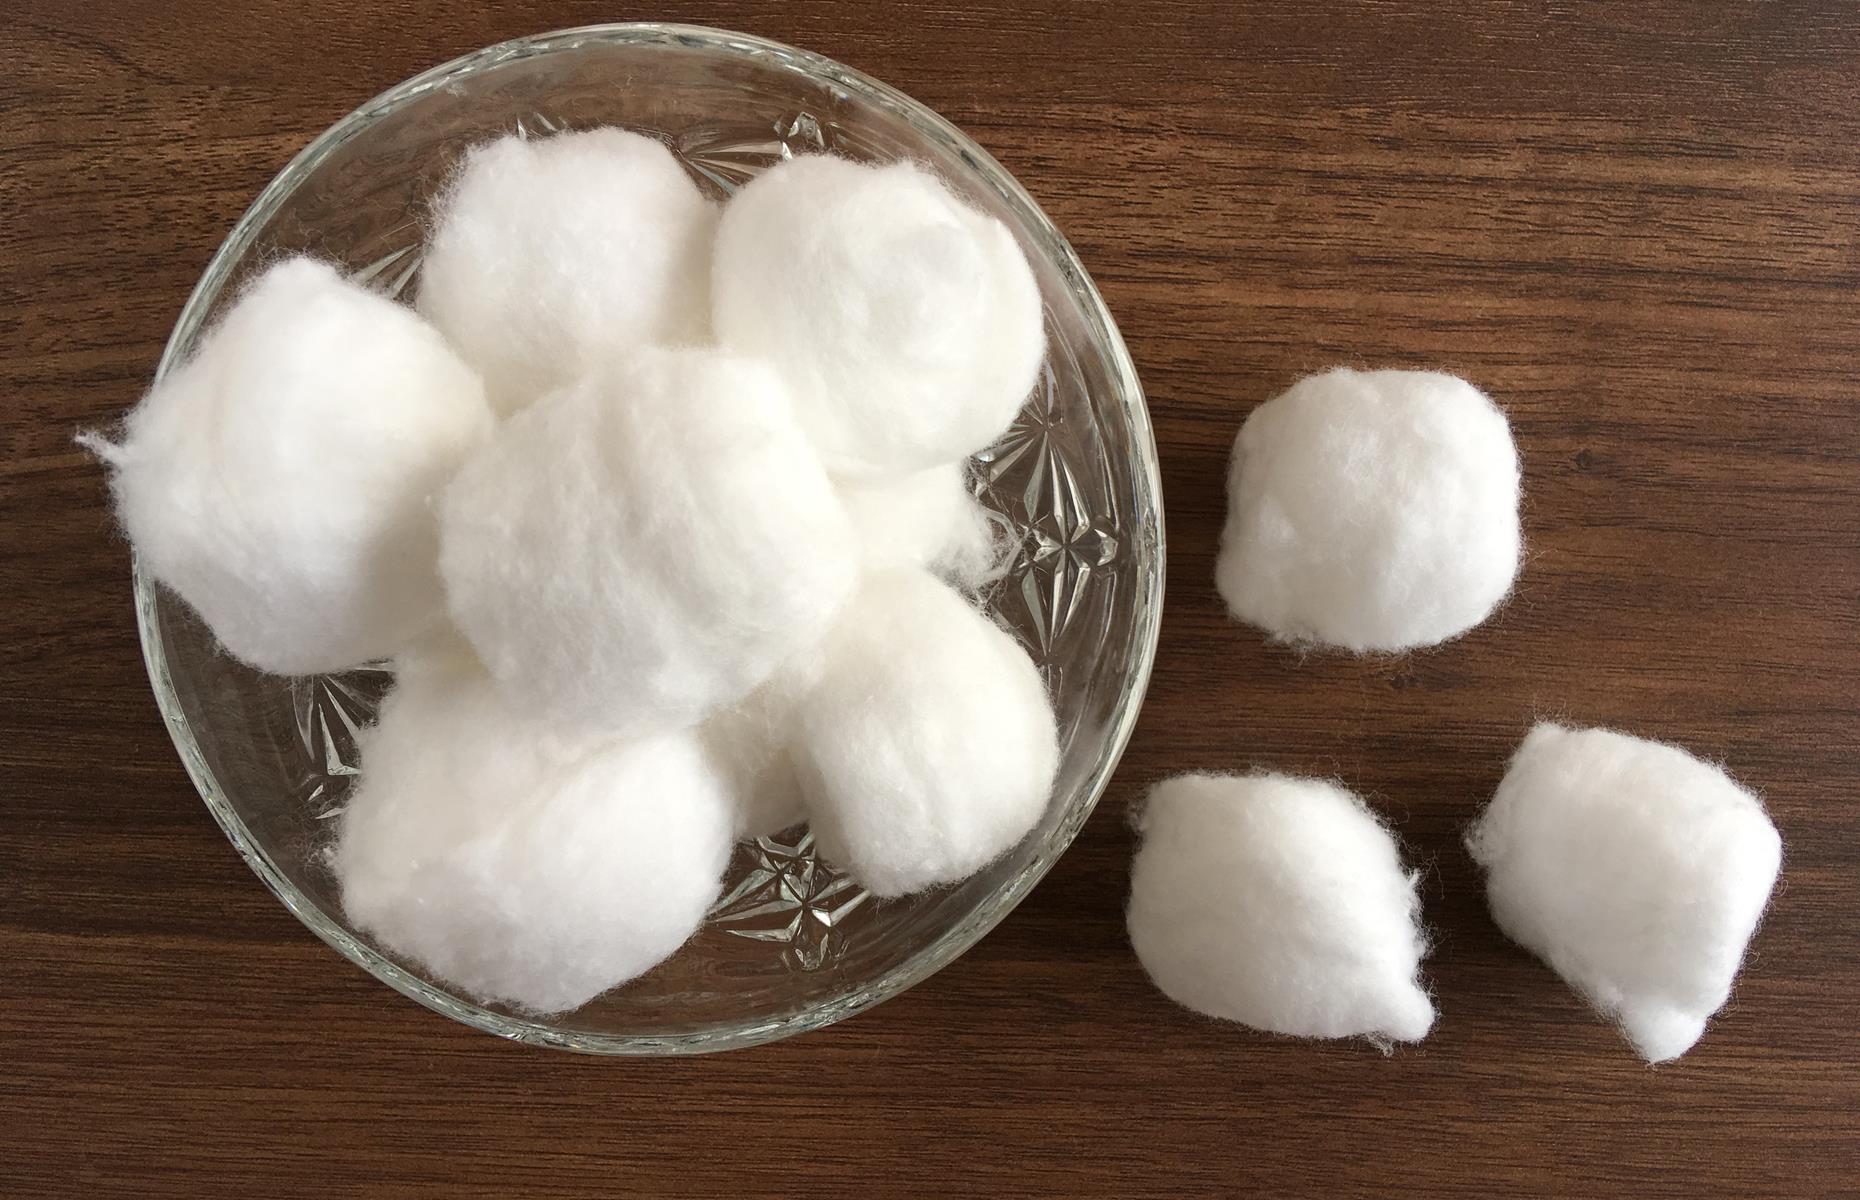 <p>Cotton wool balls aren’t just being used to remove make-up anymore – in the past few years some desperate dieters have started the very dangerous practice of downing cotton balls soaked in juice. As well as providing absolutely no nutrition, cotton balls can easily cause choking or become lodged, leading to ulcers, gangrene and intestinal bleeding.</p>